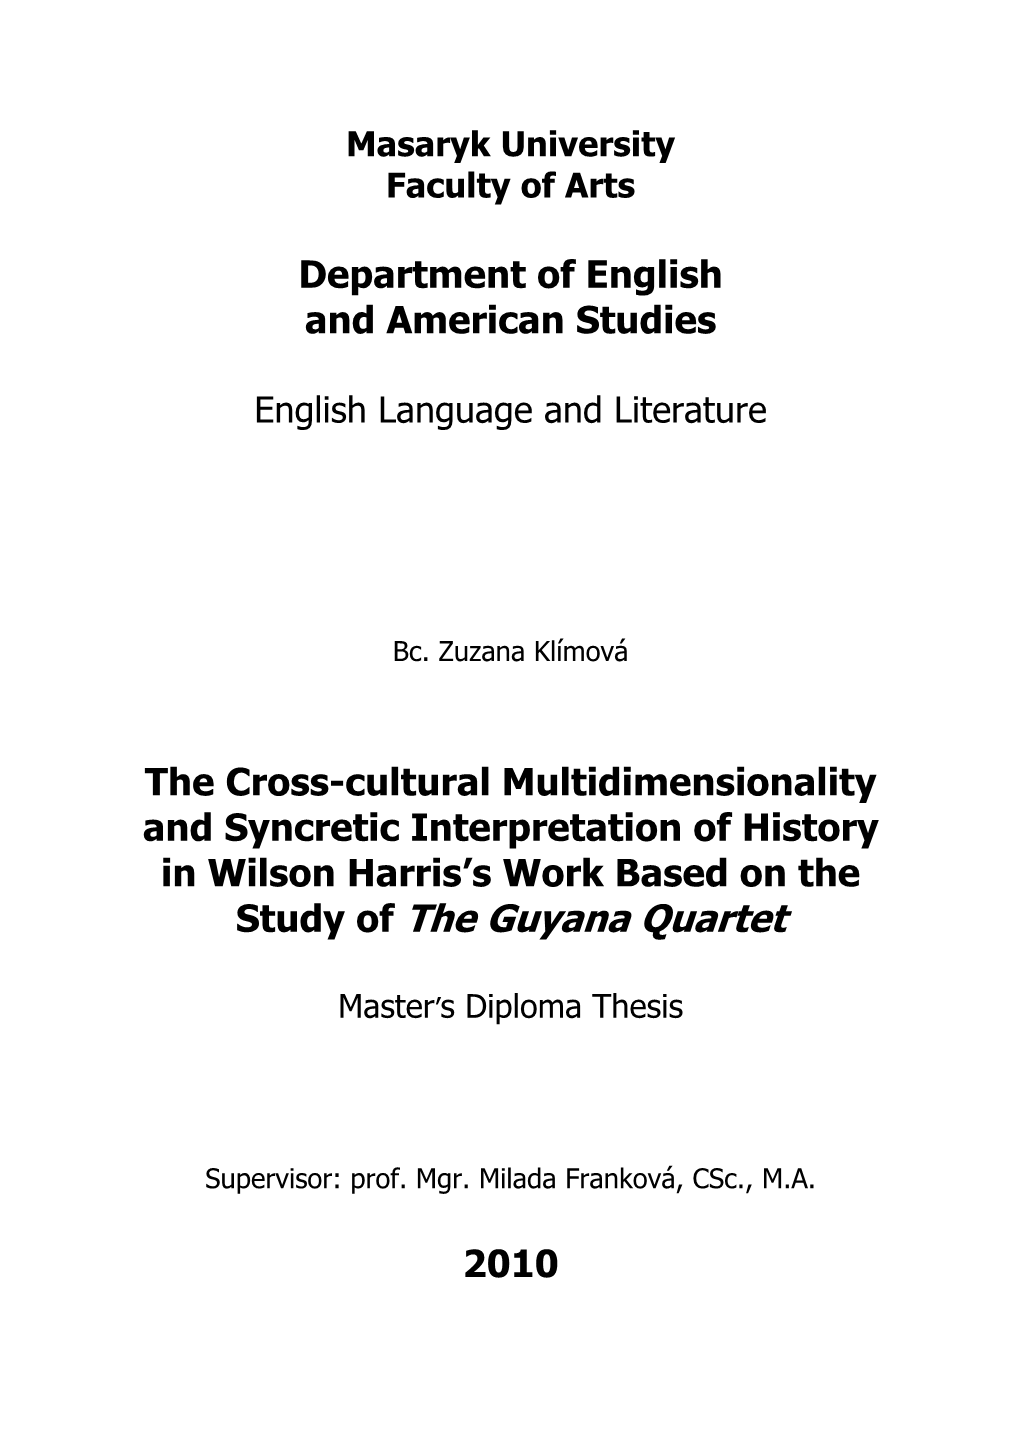 The Cross-Cultural Multidimensionality and Syncretic Interpretation of History in Wilson Harris’S Work Based on the Study of the Guyana Quartet